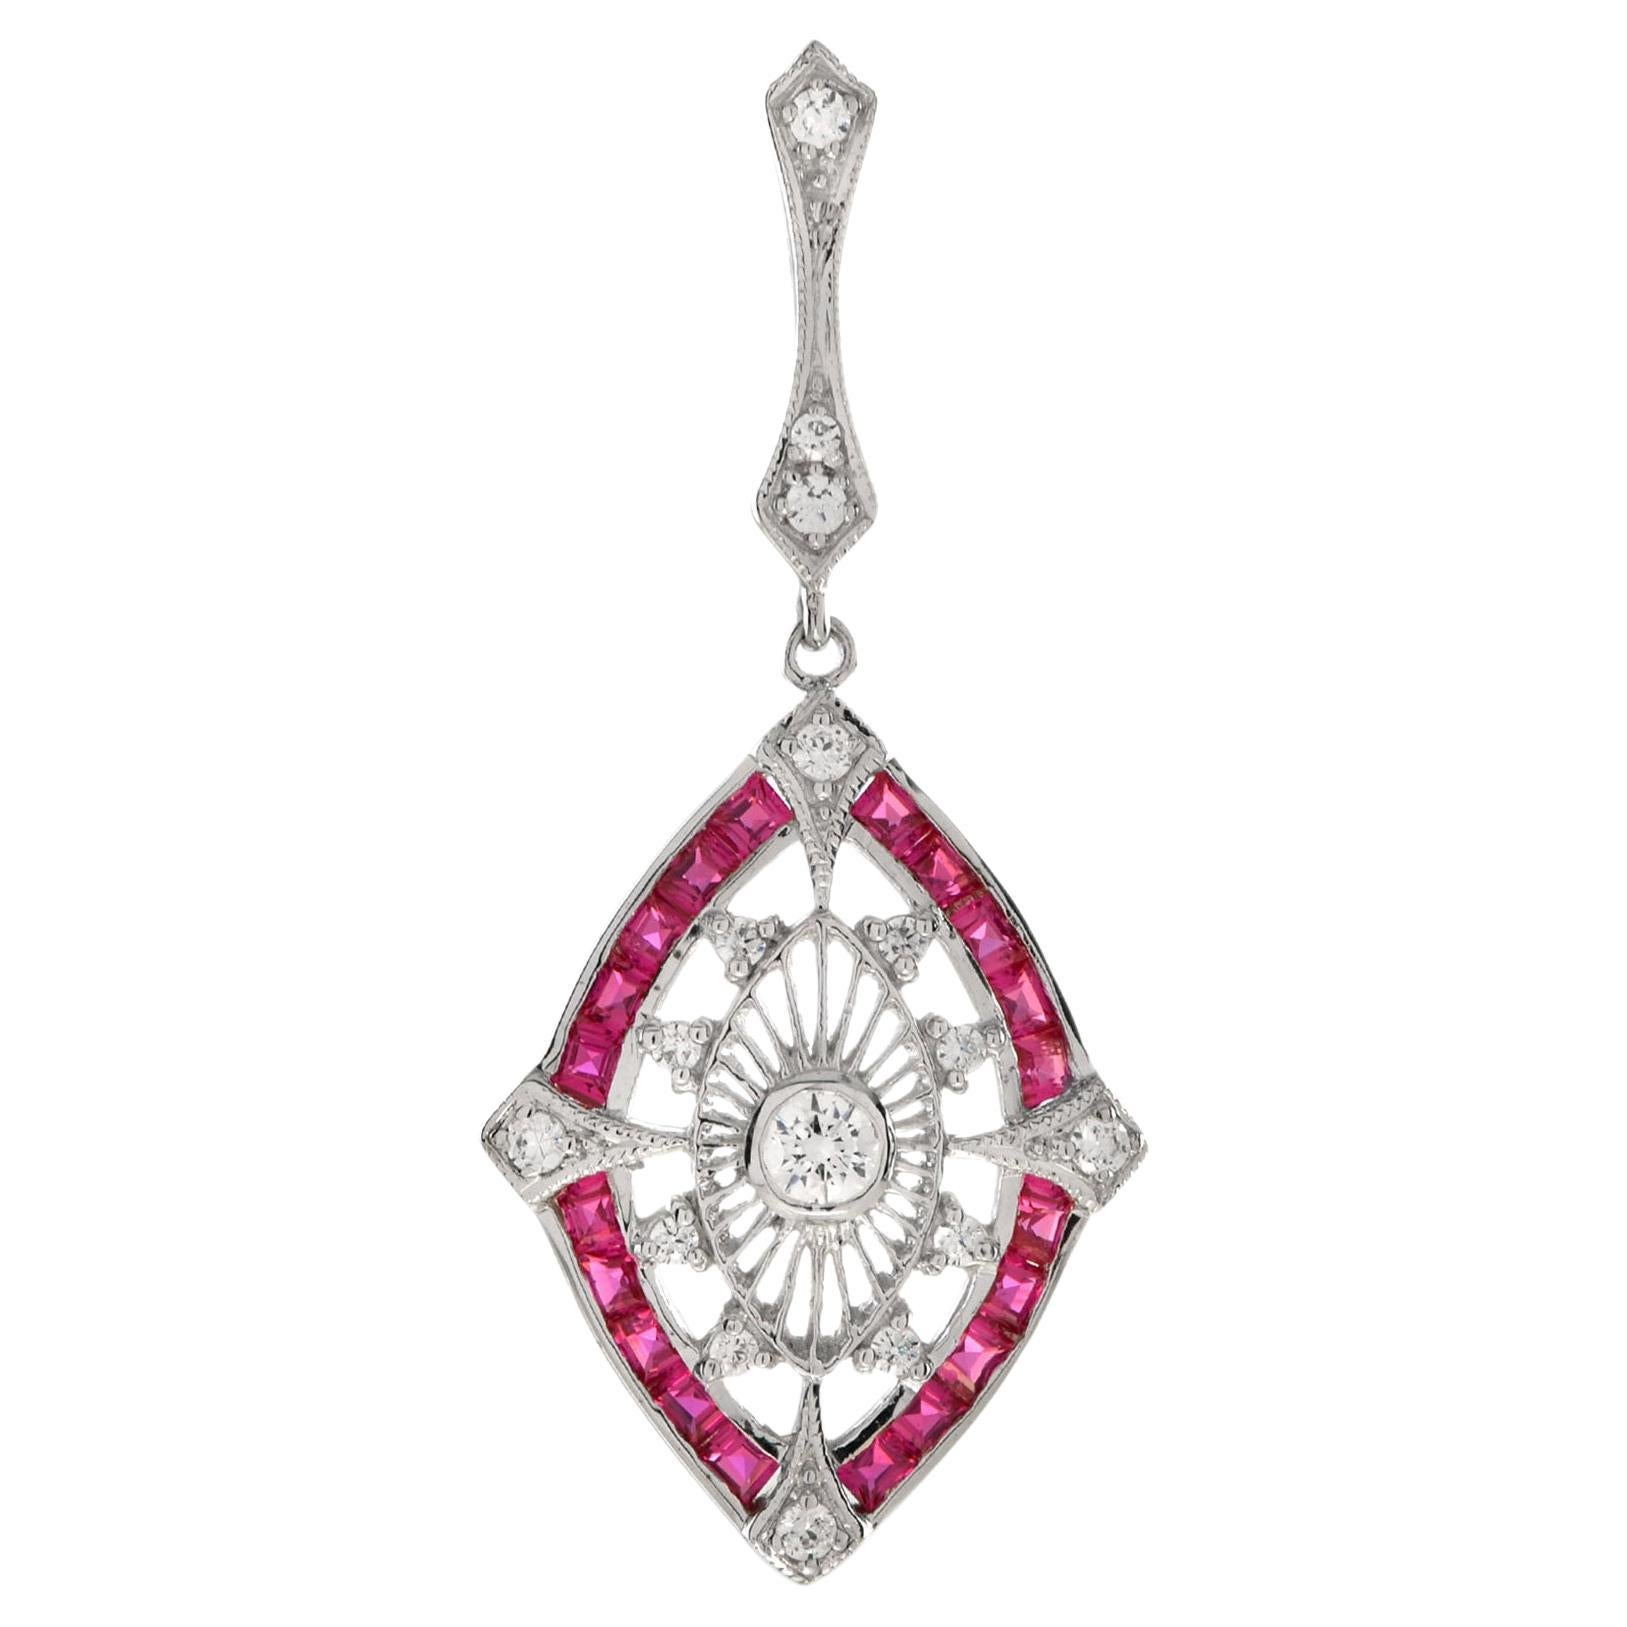 Majesté Art Deco Style Diamond and Ruby Marquise Shape Pendant in 14K White Gold